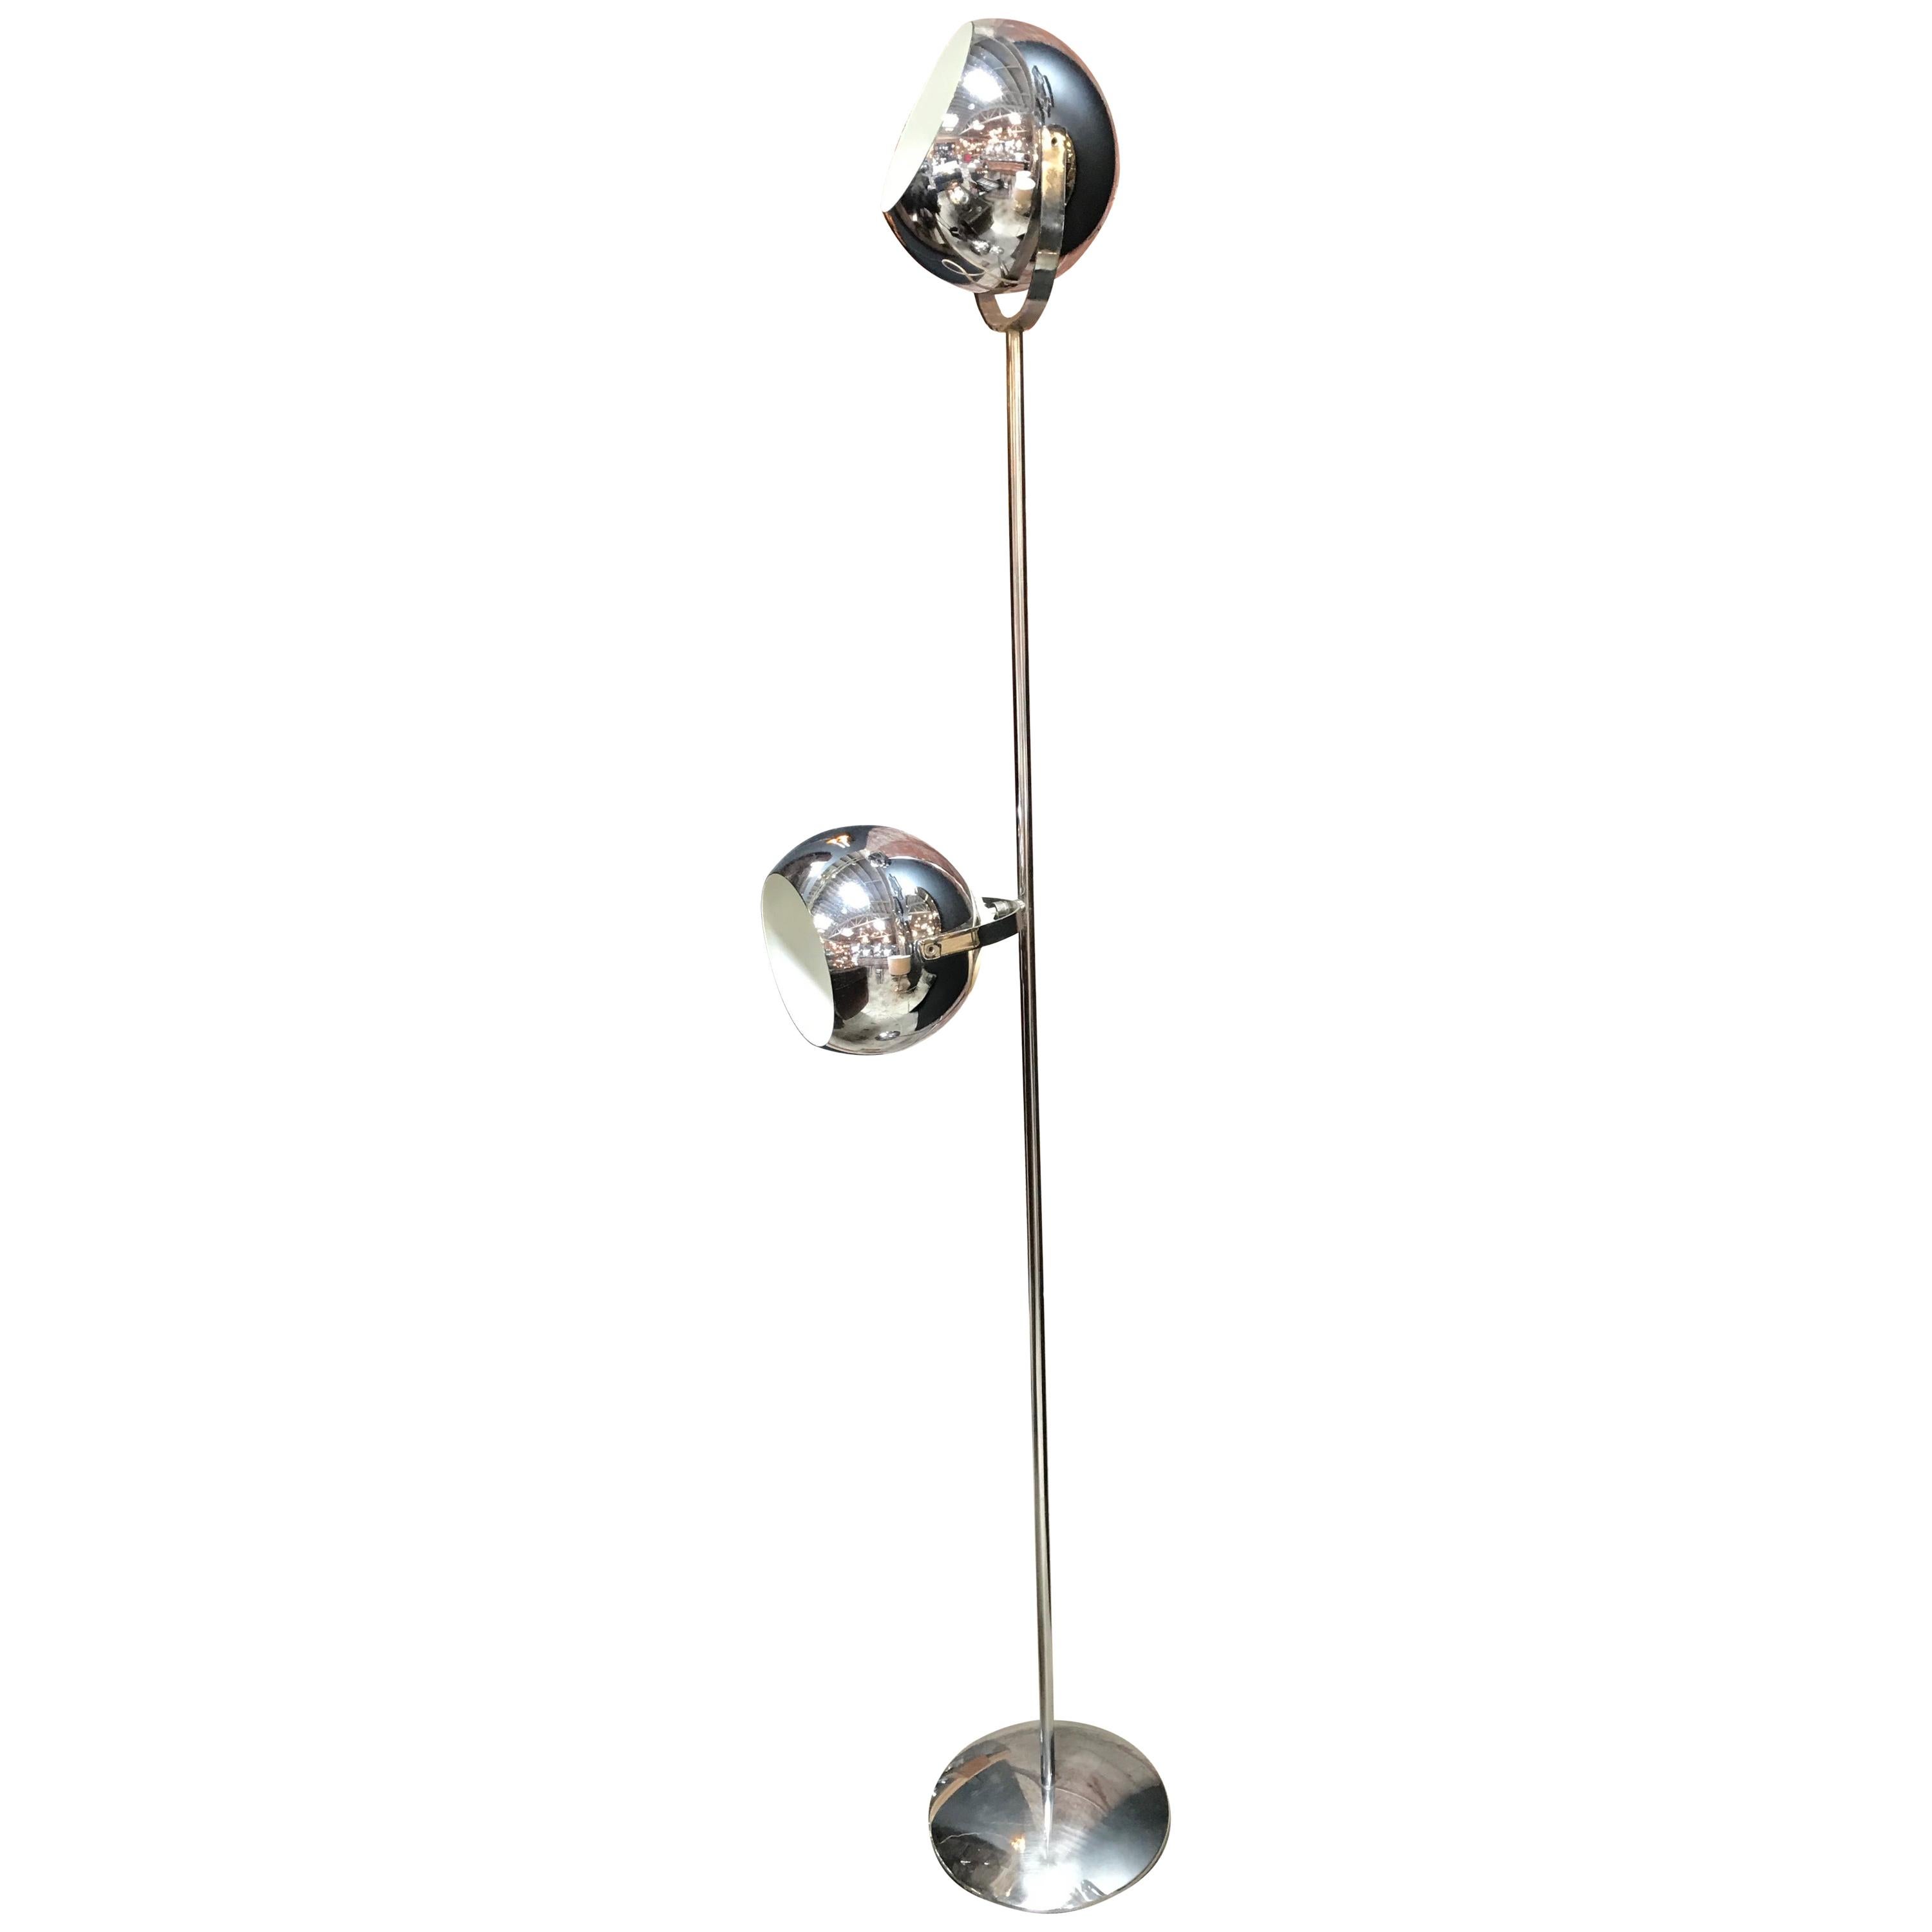 Italian Adjustable Floor Lamp with Articulating Globe Shades, 1970s For Sale